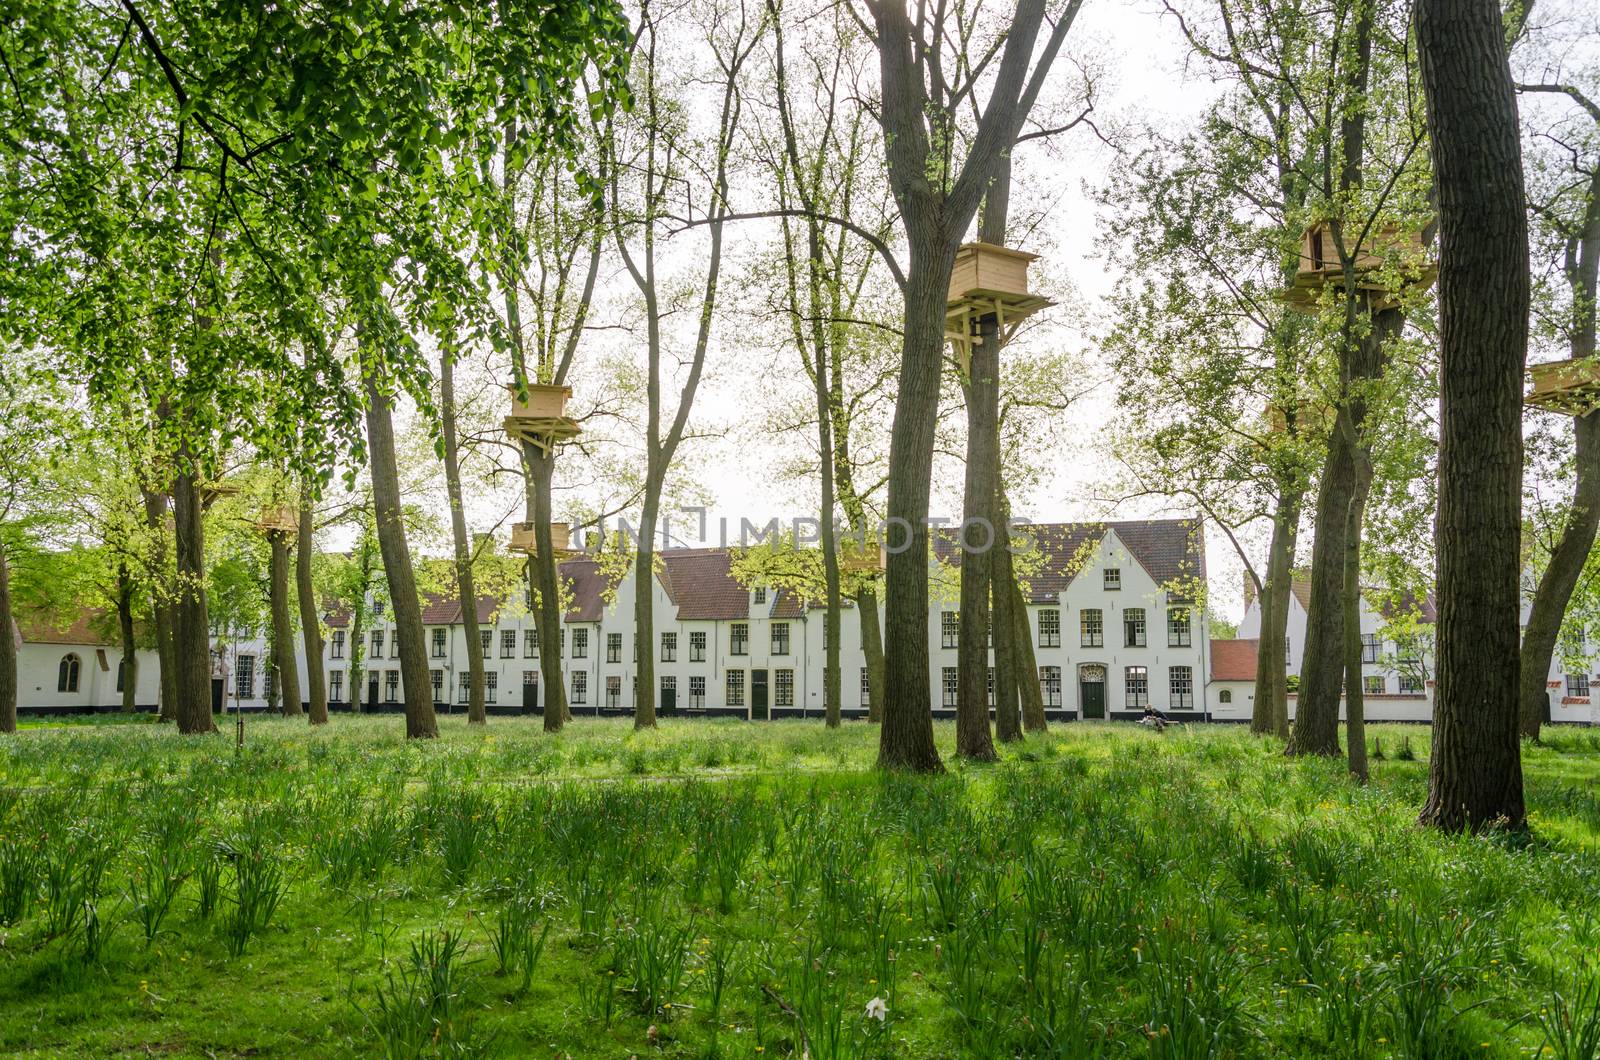 Tree Houses in the Begijnhof in Bruges by siraanamwong